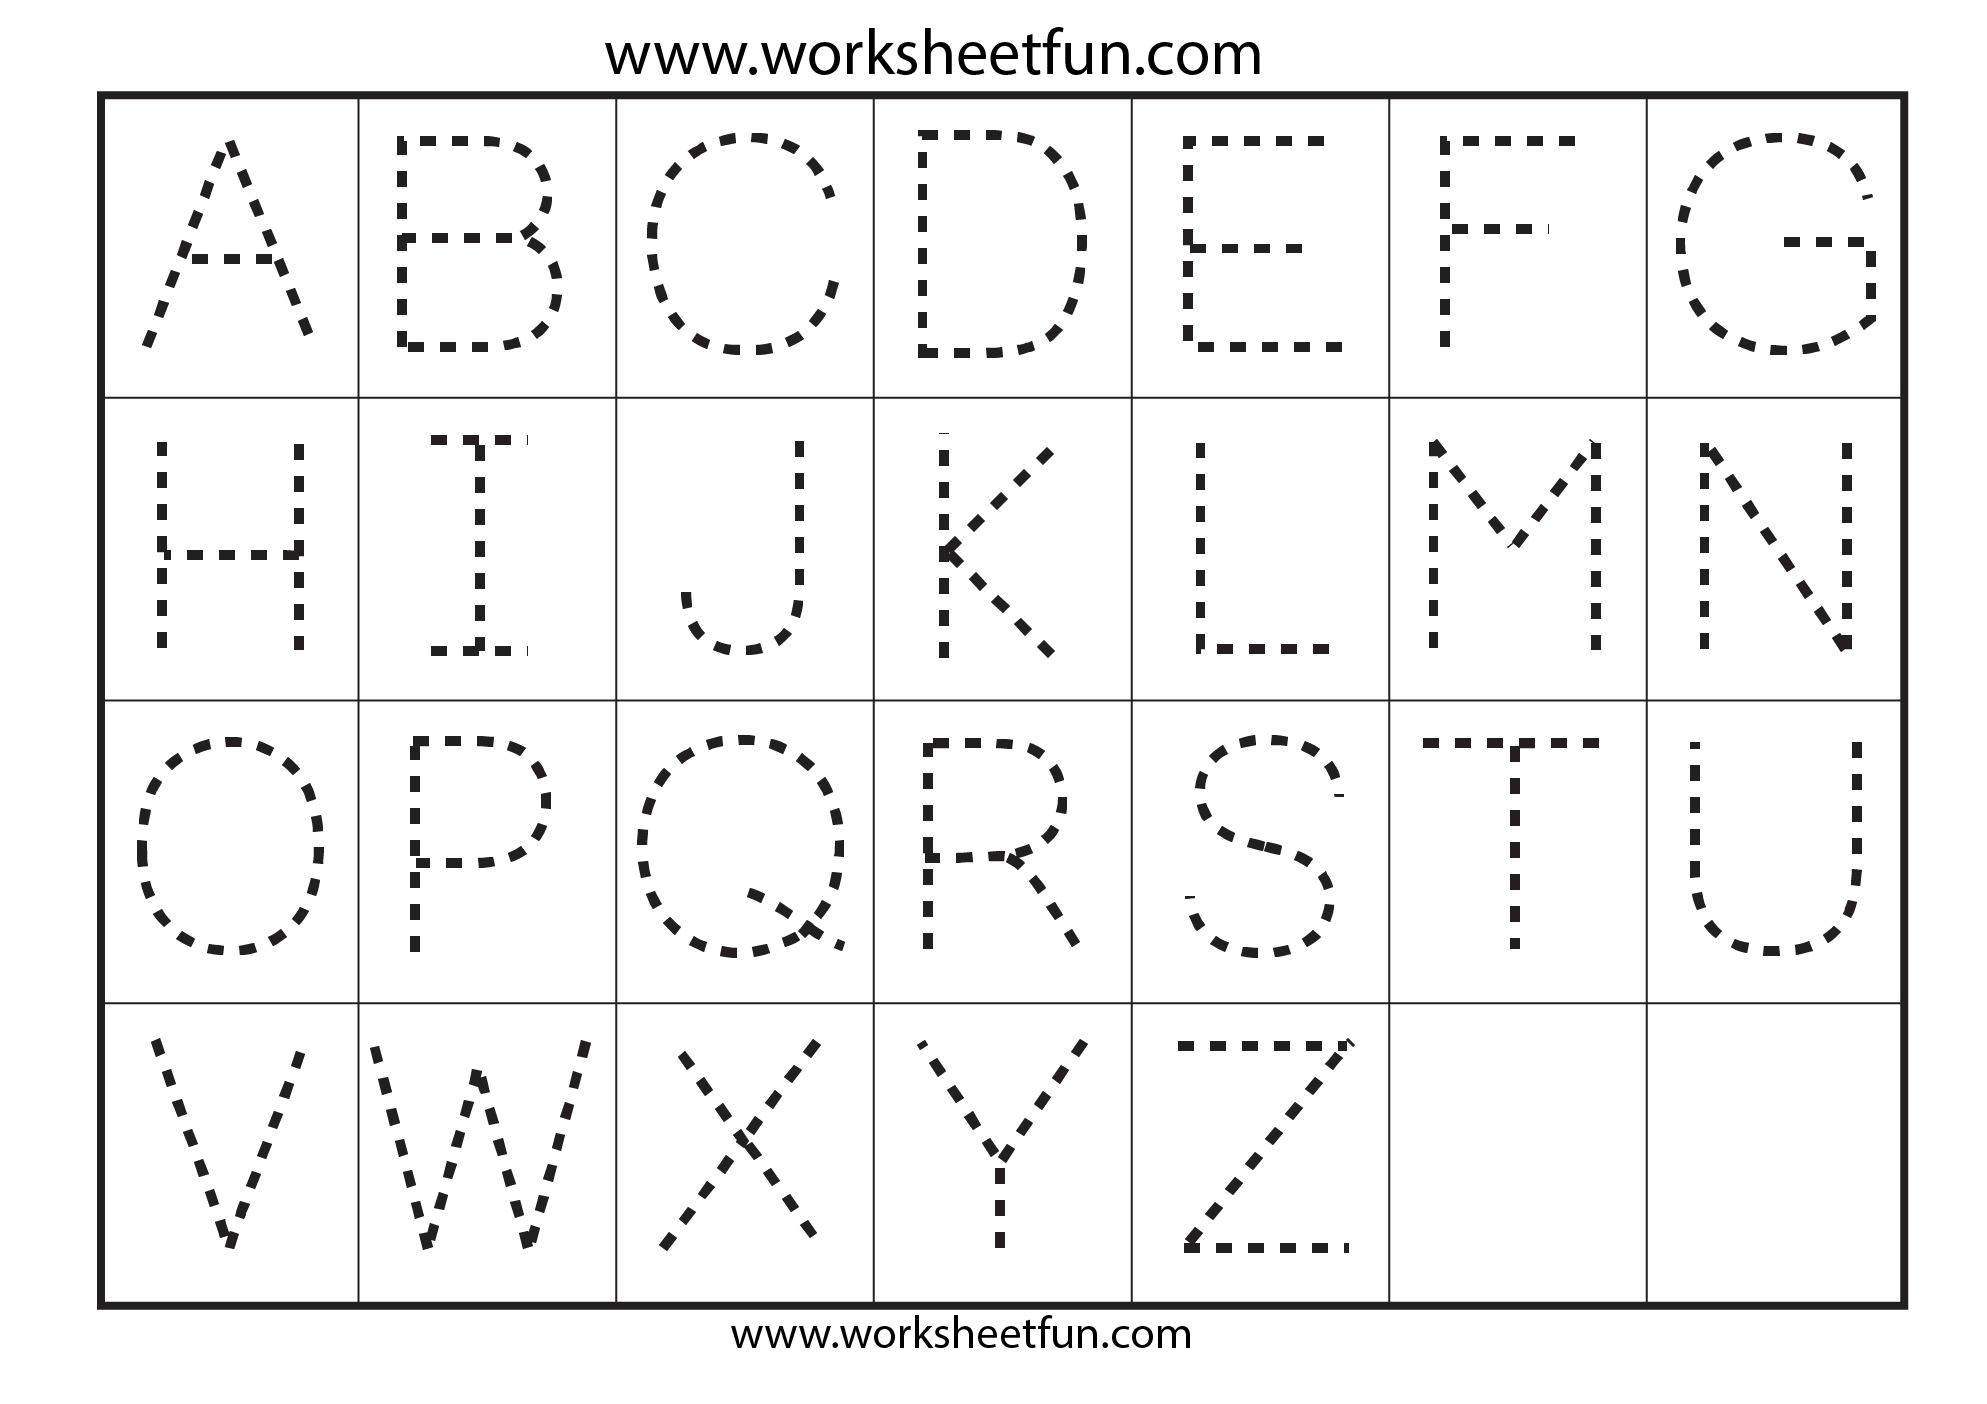 Preschool Worksheets Alphabet Tracing Letter A | Printable with regard to Abc Tracing Letters Preschool